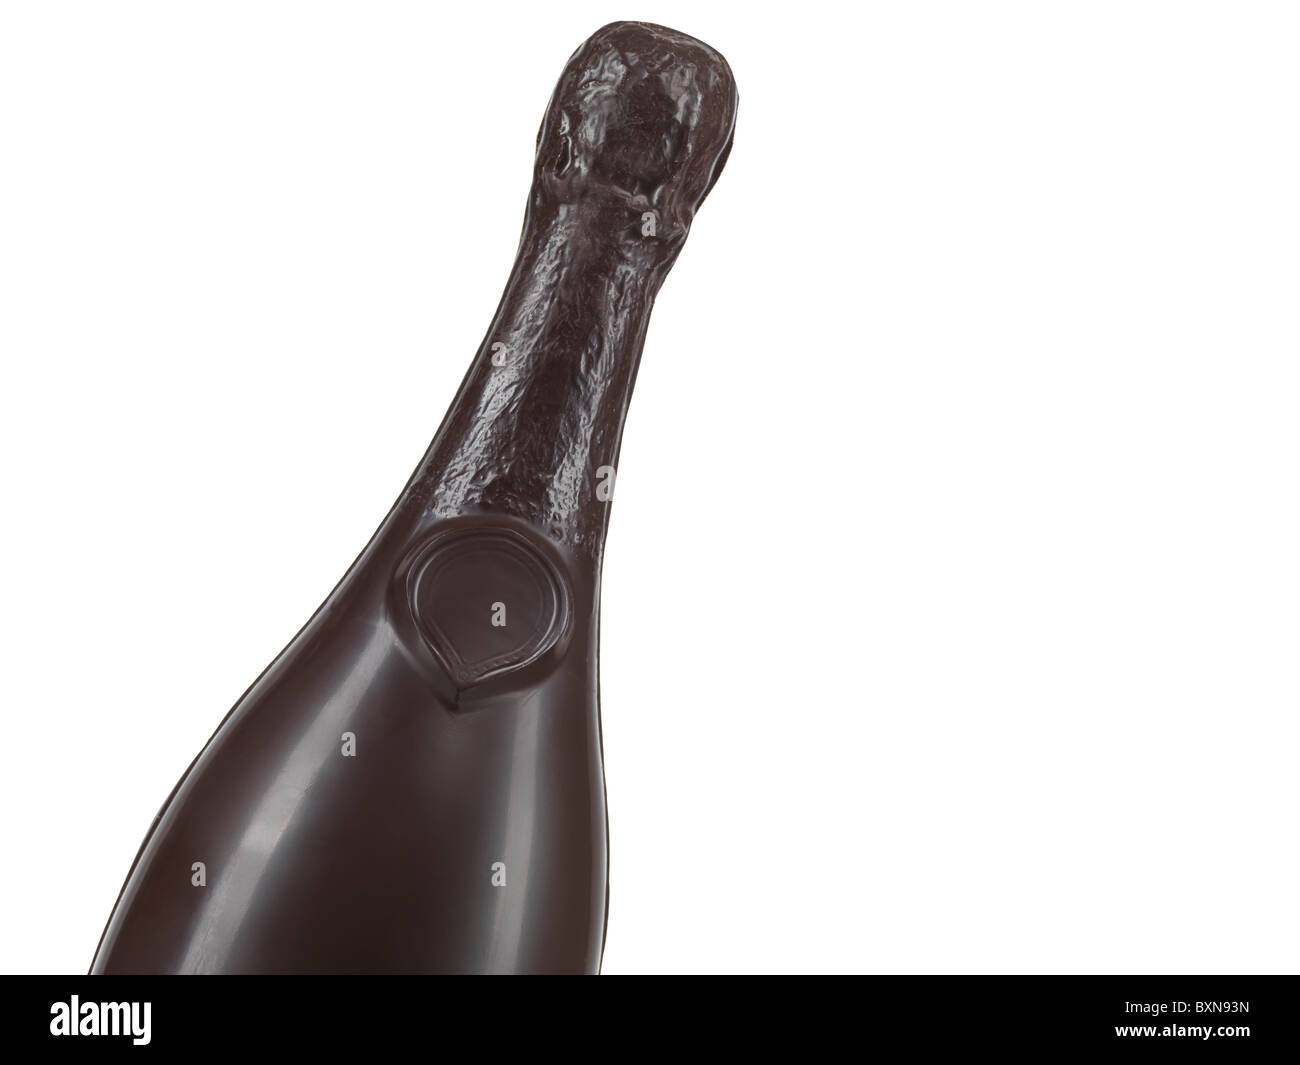 Champagne bottle made of dark chocolate isolated on white backgroud Stock Photo